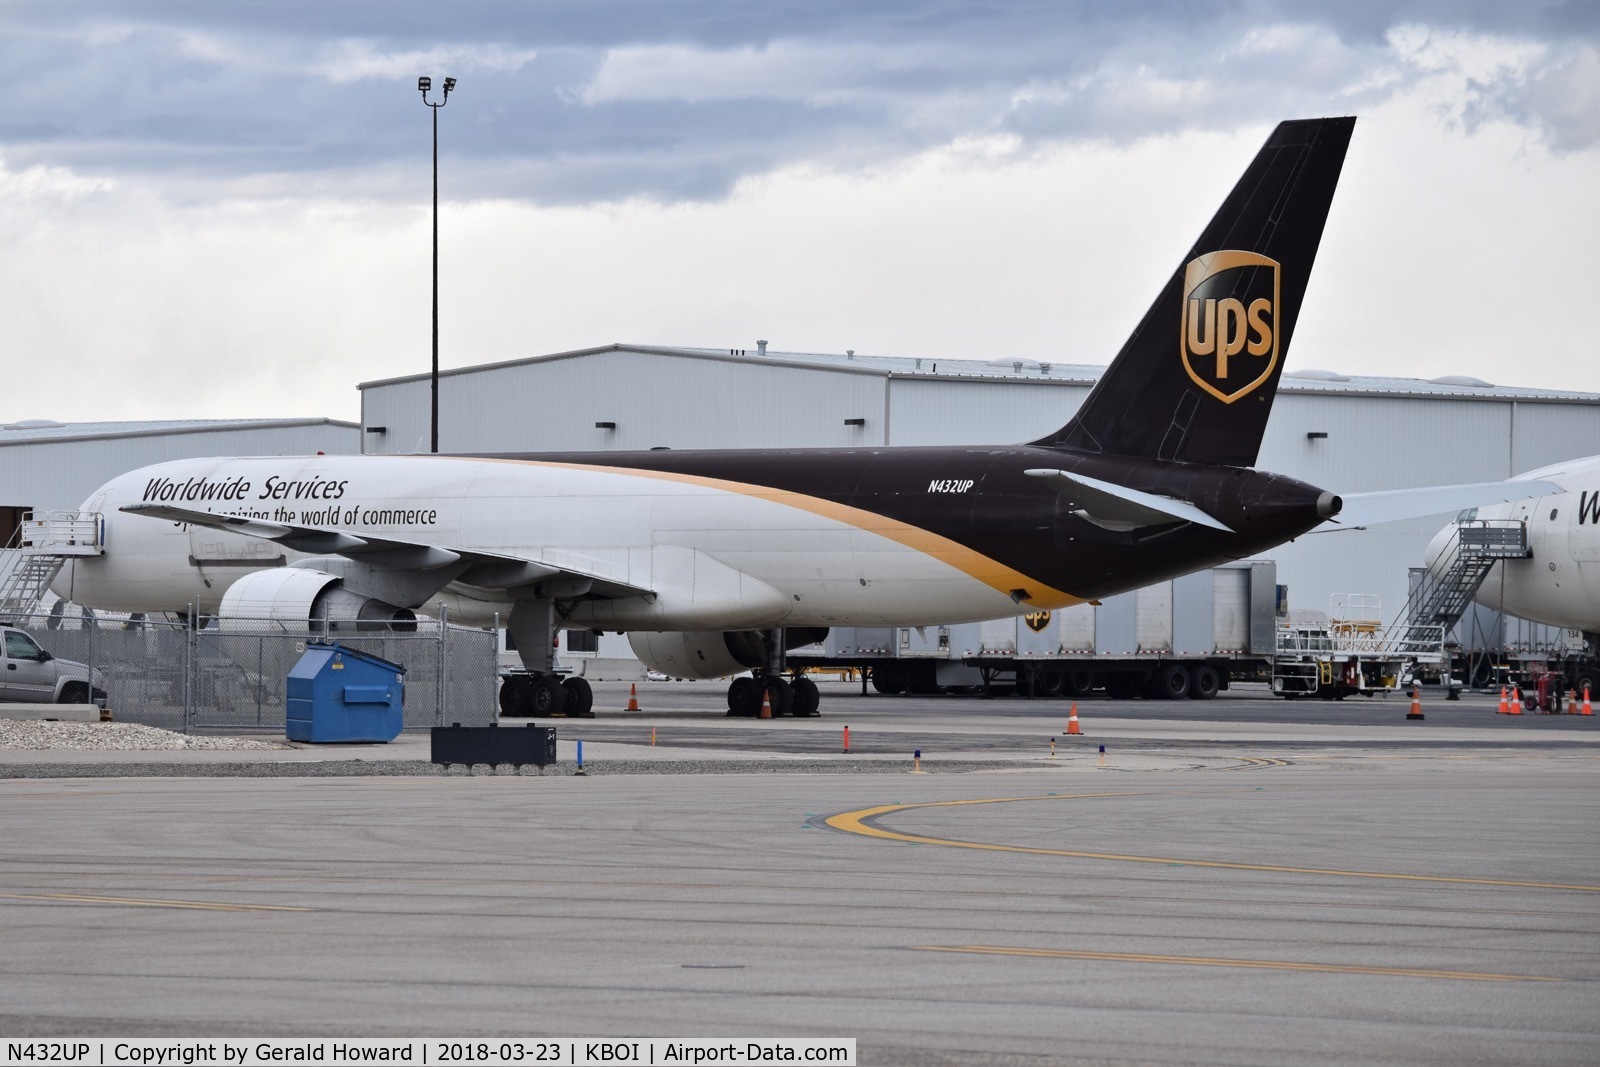 N432UP, 1993 Boeing 757-24APF C/N 25463, Parked on the UPS ramp.